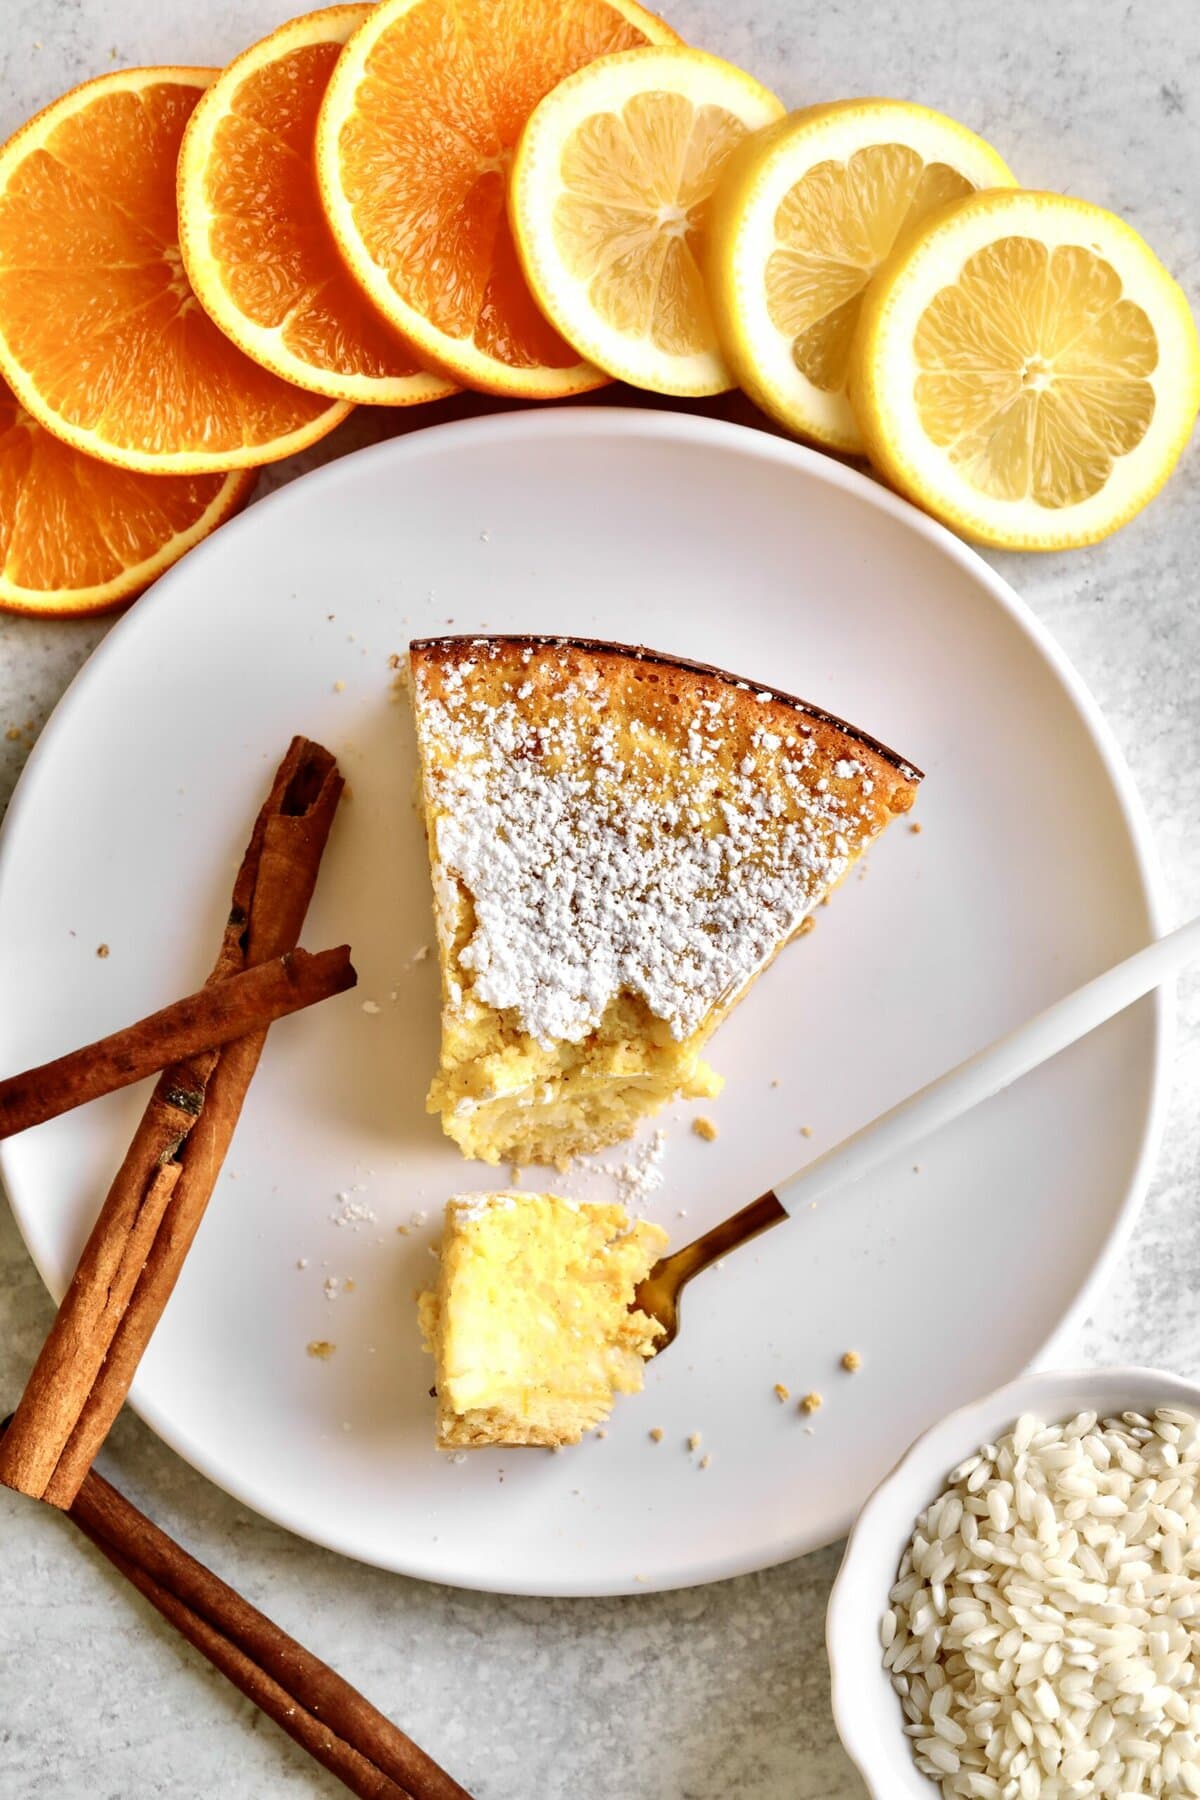 Italian Easter Rice Pie Recipe (Pastiera di Riso)- on a plate with orange and lemon slices and cinnamon sticks surrounding plate.